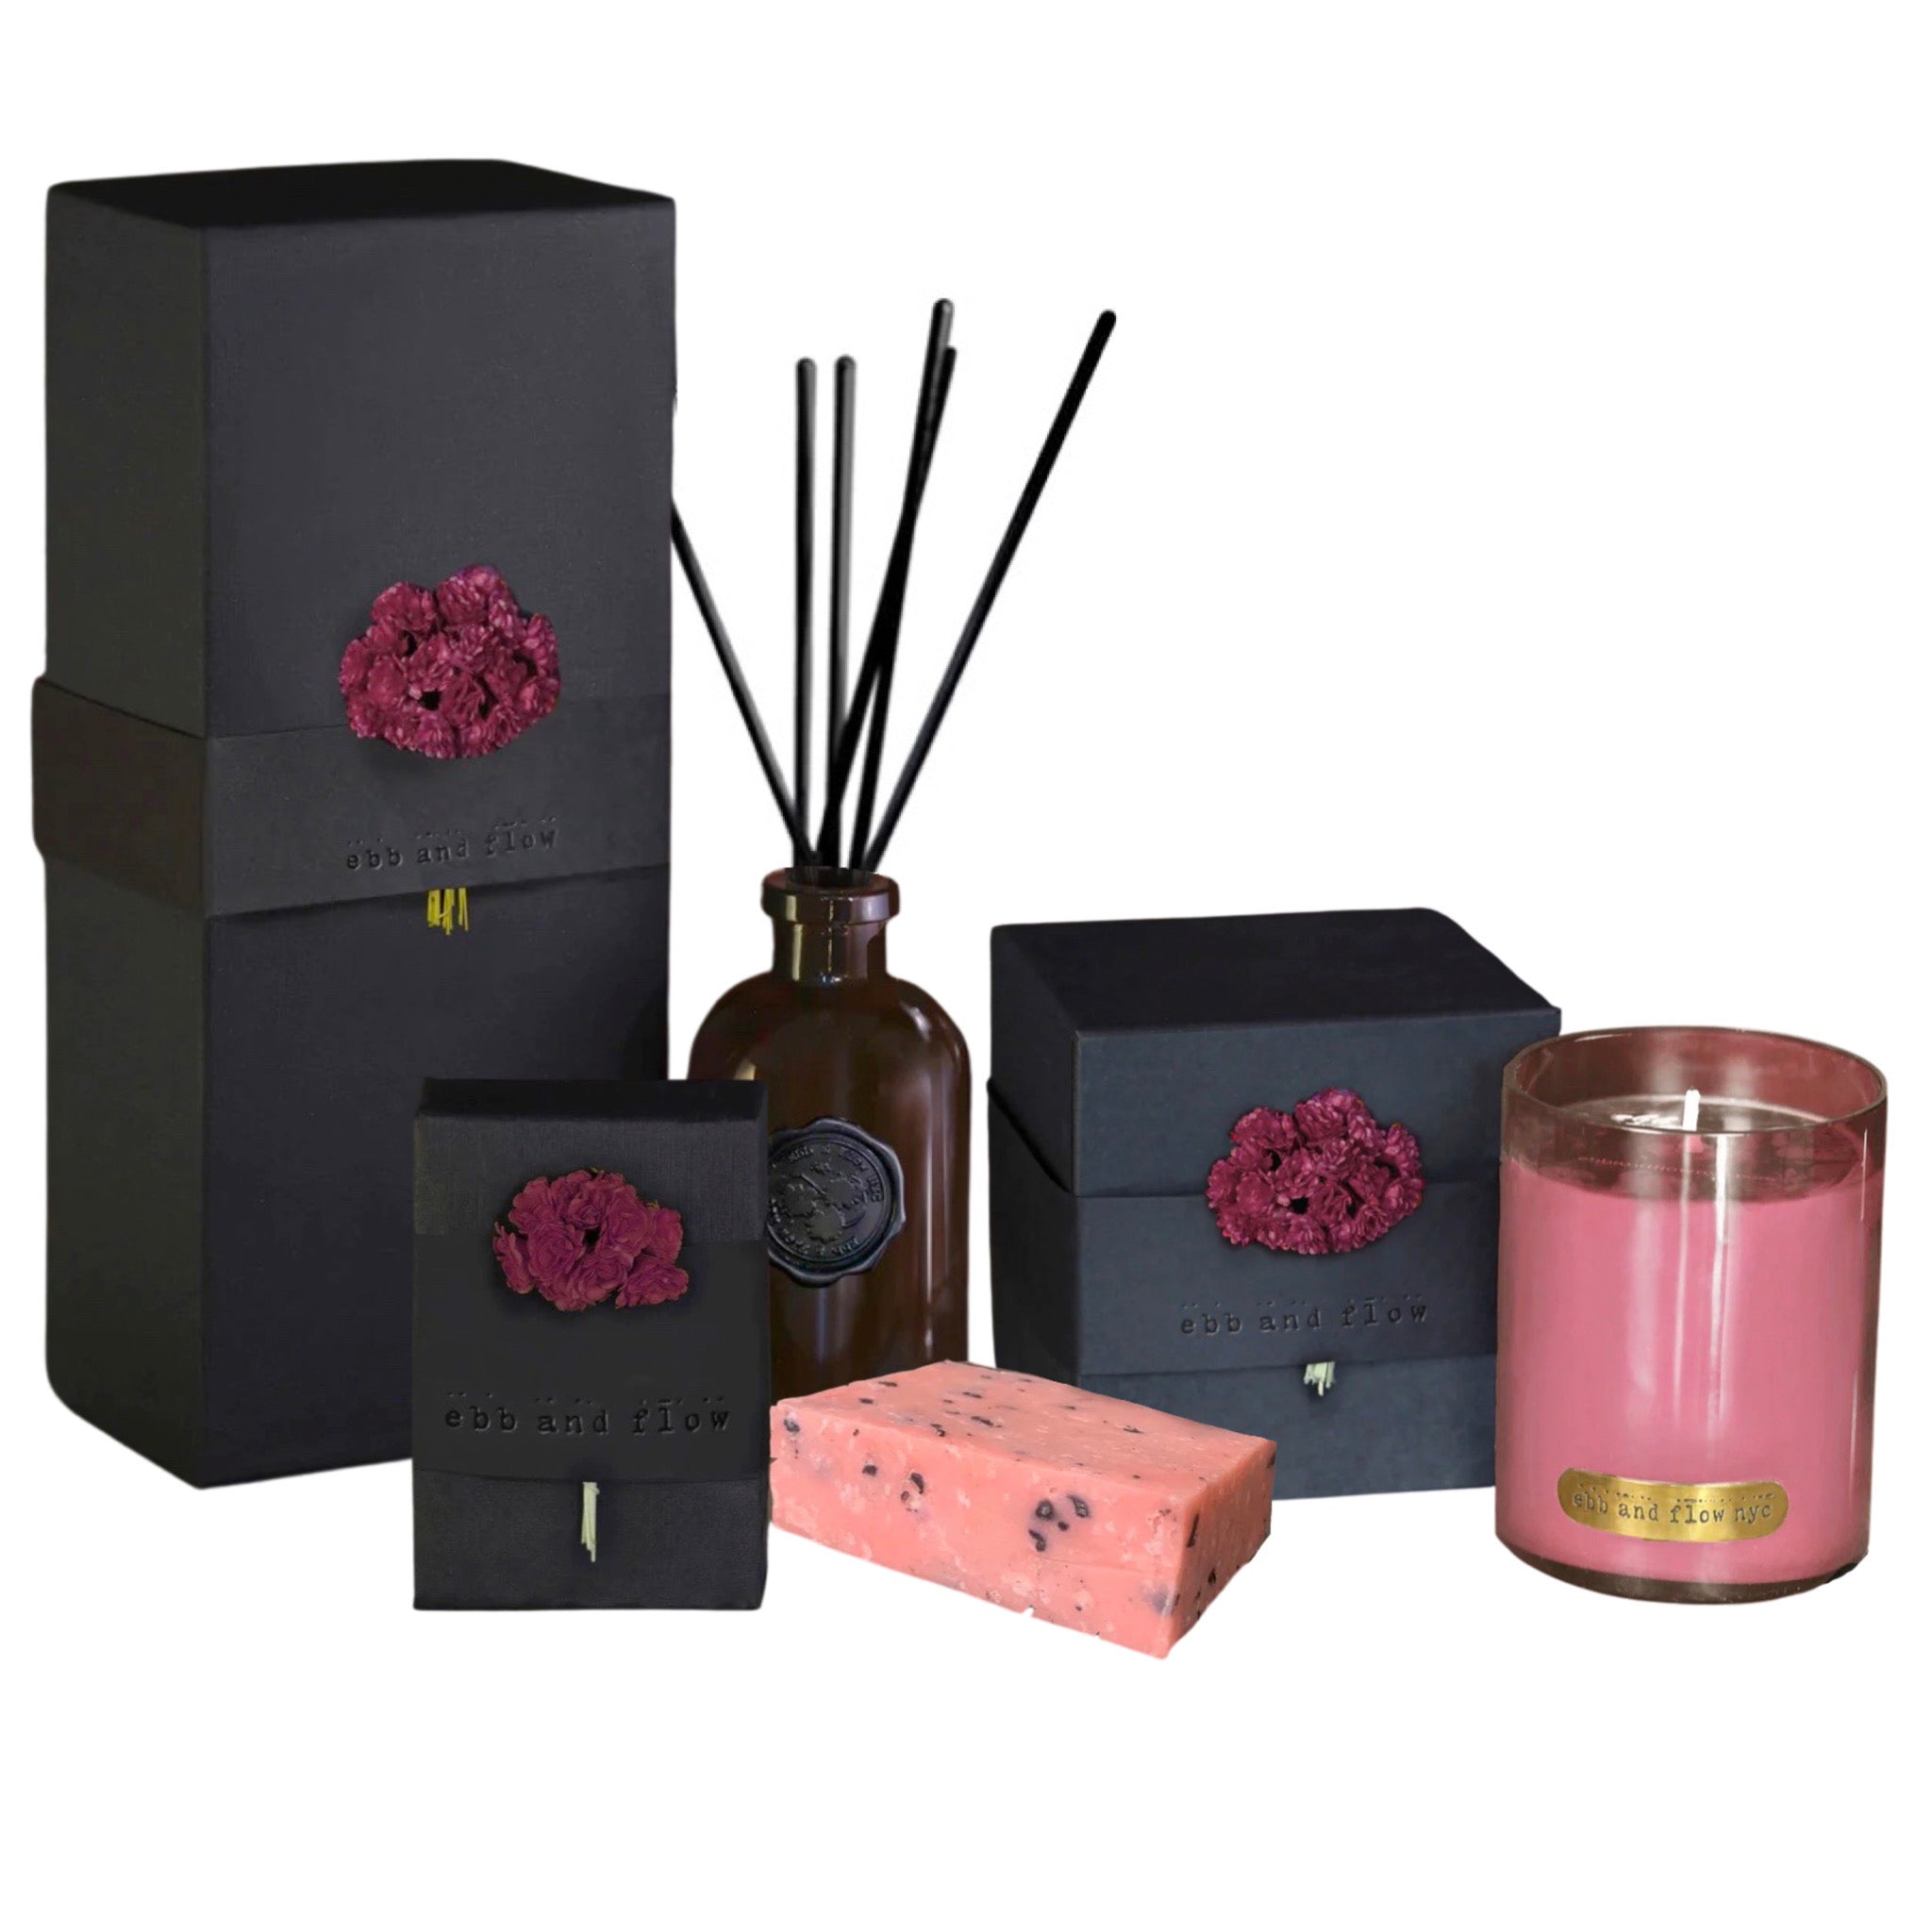 Ebb + Flow NYC Fig & Cedar Fragrance Gift Set available at Shaylula Jewlery & Gifts in Tarrytown, NY and online. The scent of mission fig trees surrounded by an atlas cedar forest will bring you into a Moroccan fairyland... The Fig & Cedar Fragrance Gift Set includes a reed diffuser that will last up to 1 year, a soy candle in a mouth-blown glass with a 65 hour burn time and an olive oil based soap with plant-based essential oils.  